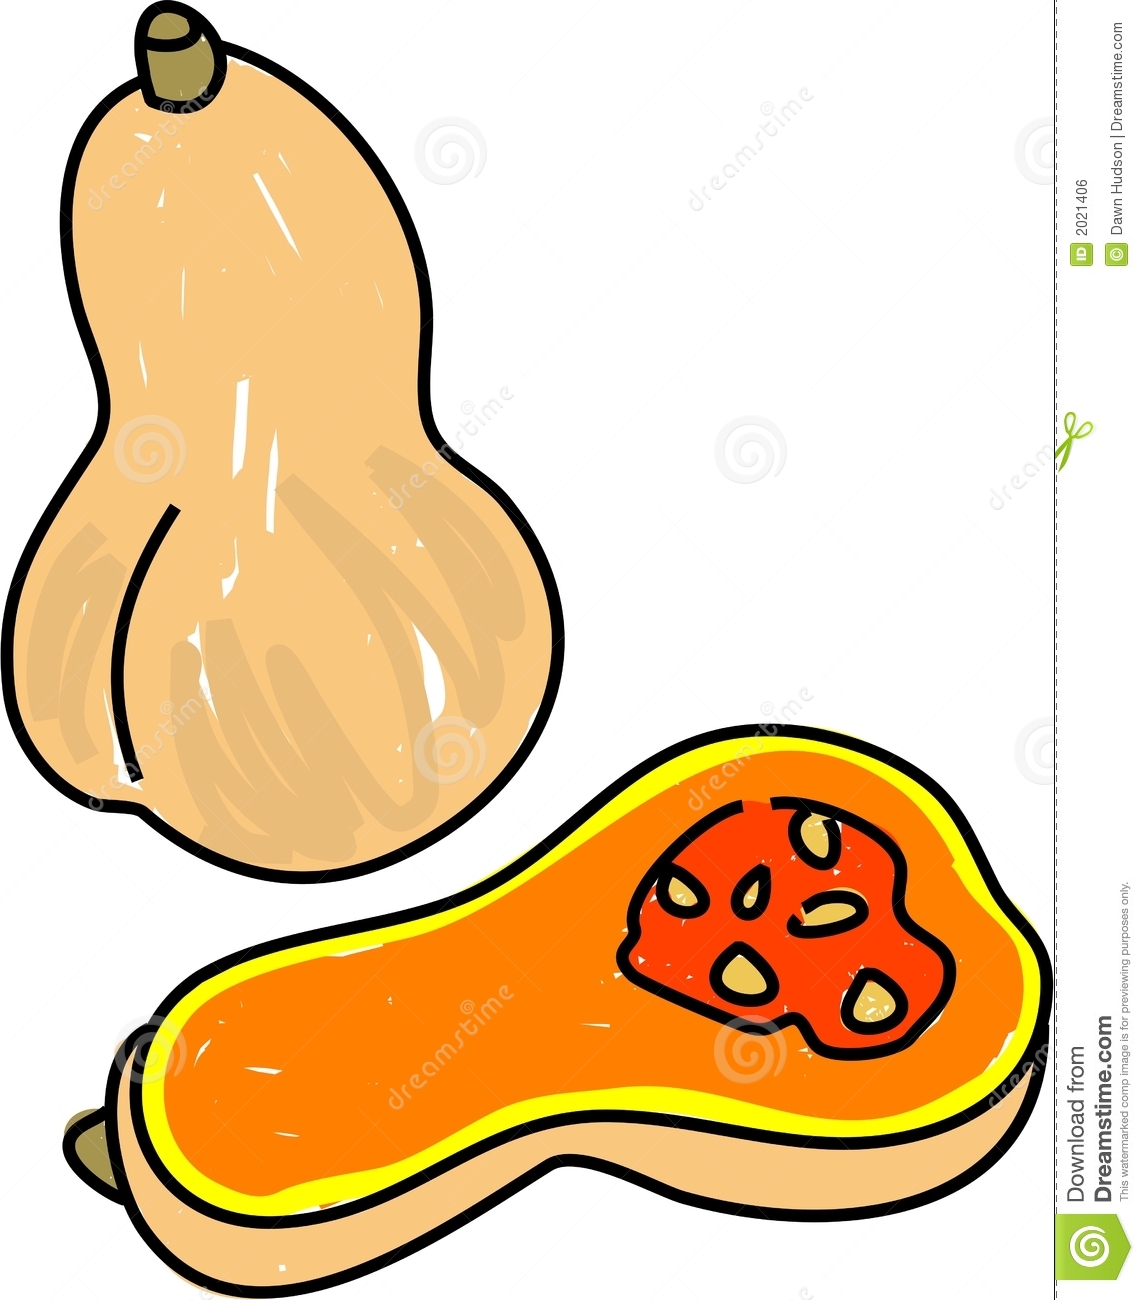 Butternut Squash Isolated On White Drawn In Toddler Art Style